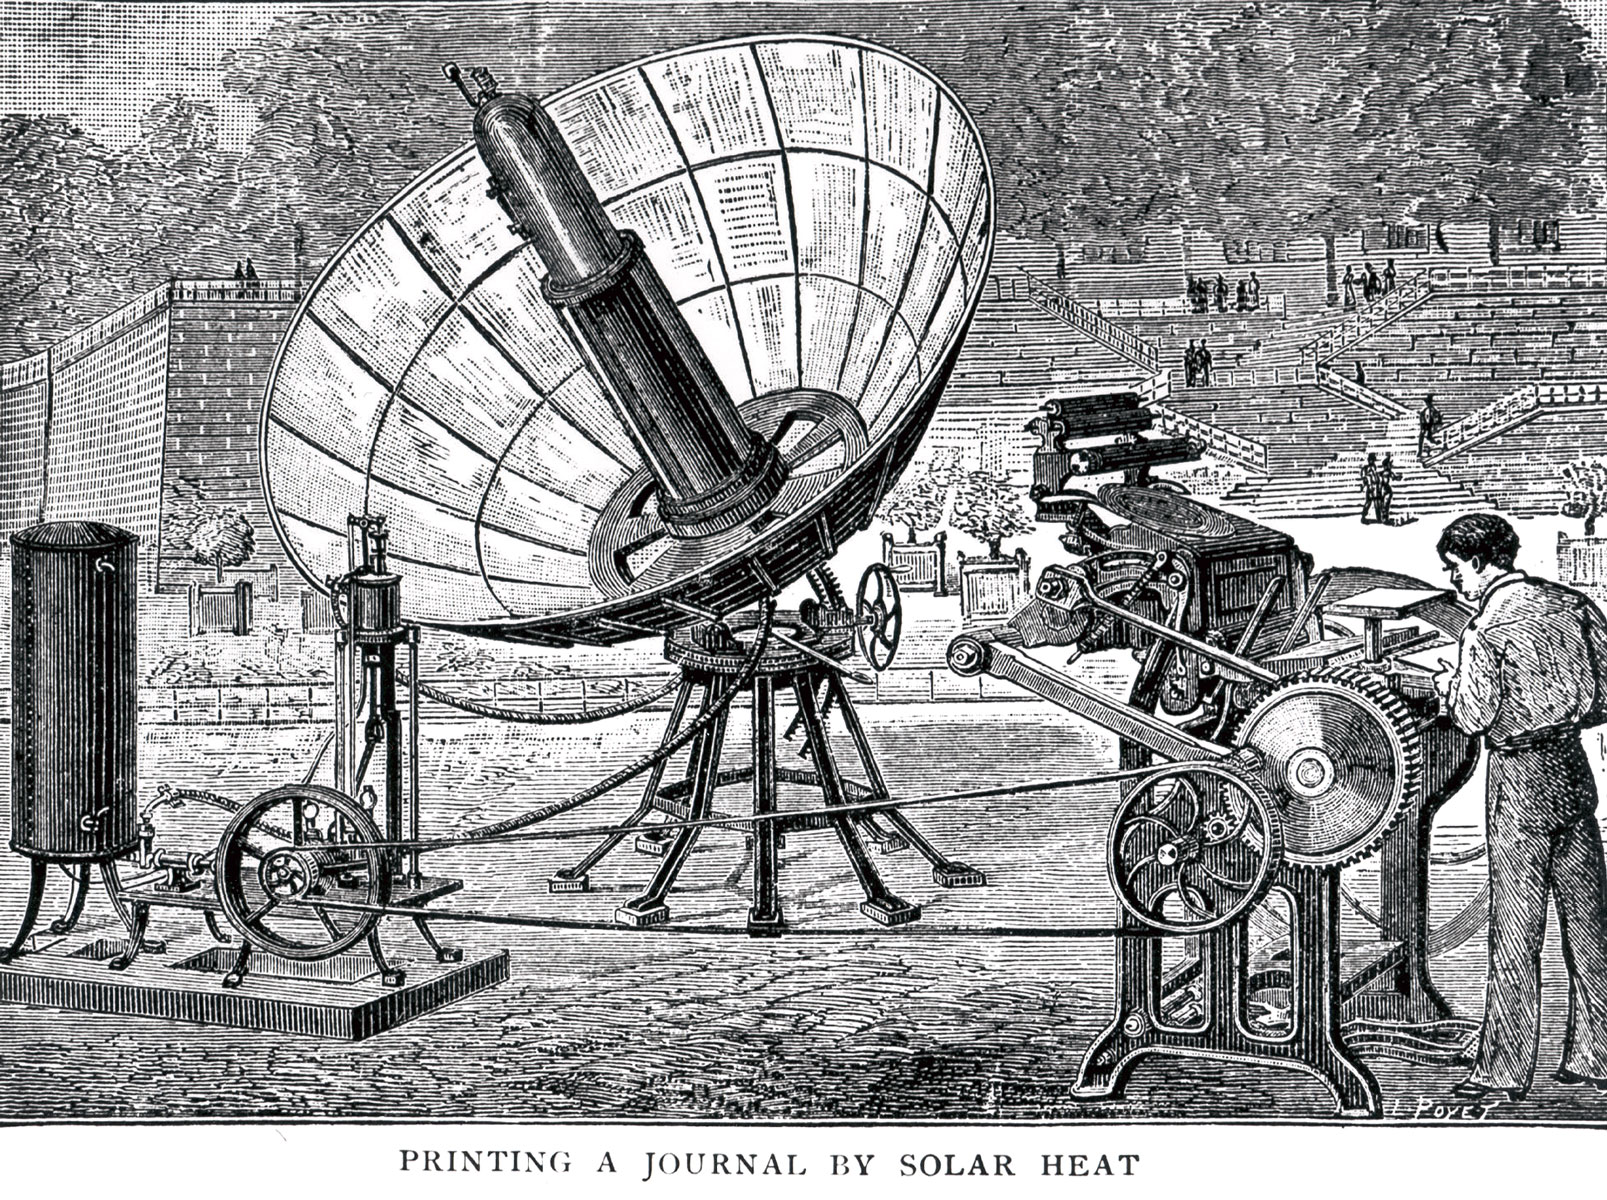 An illustration of Abel Pifre and his solar powered printing press published in Scientific American magazine, May 1882.